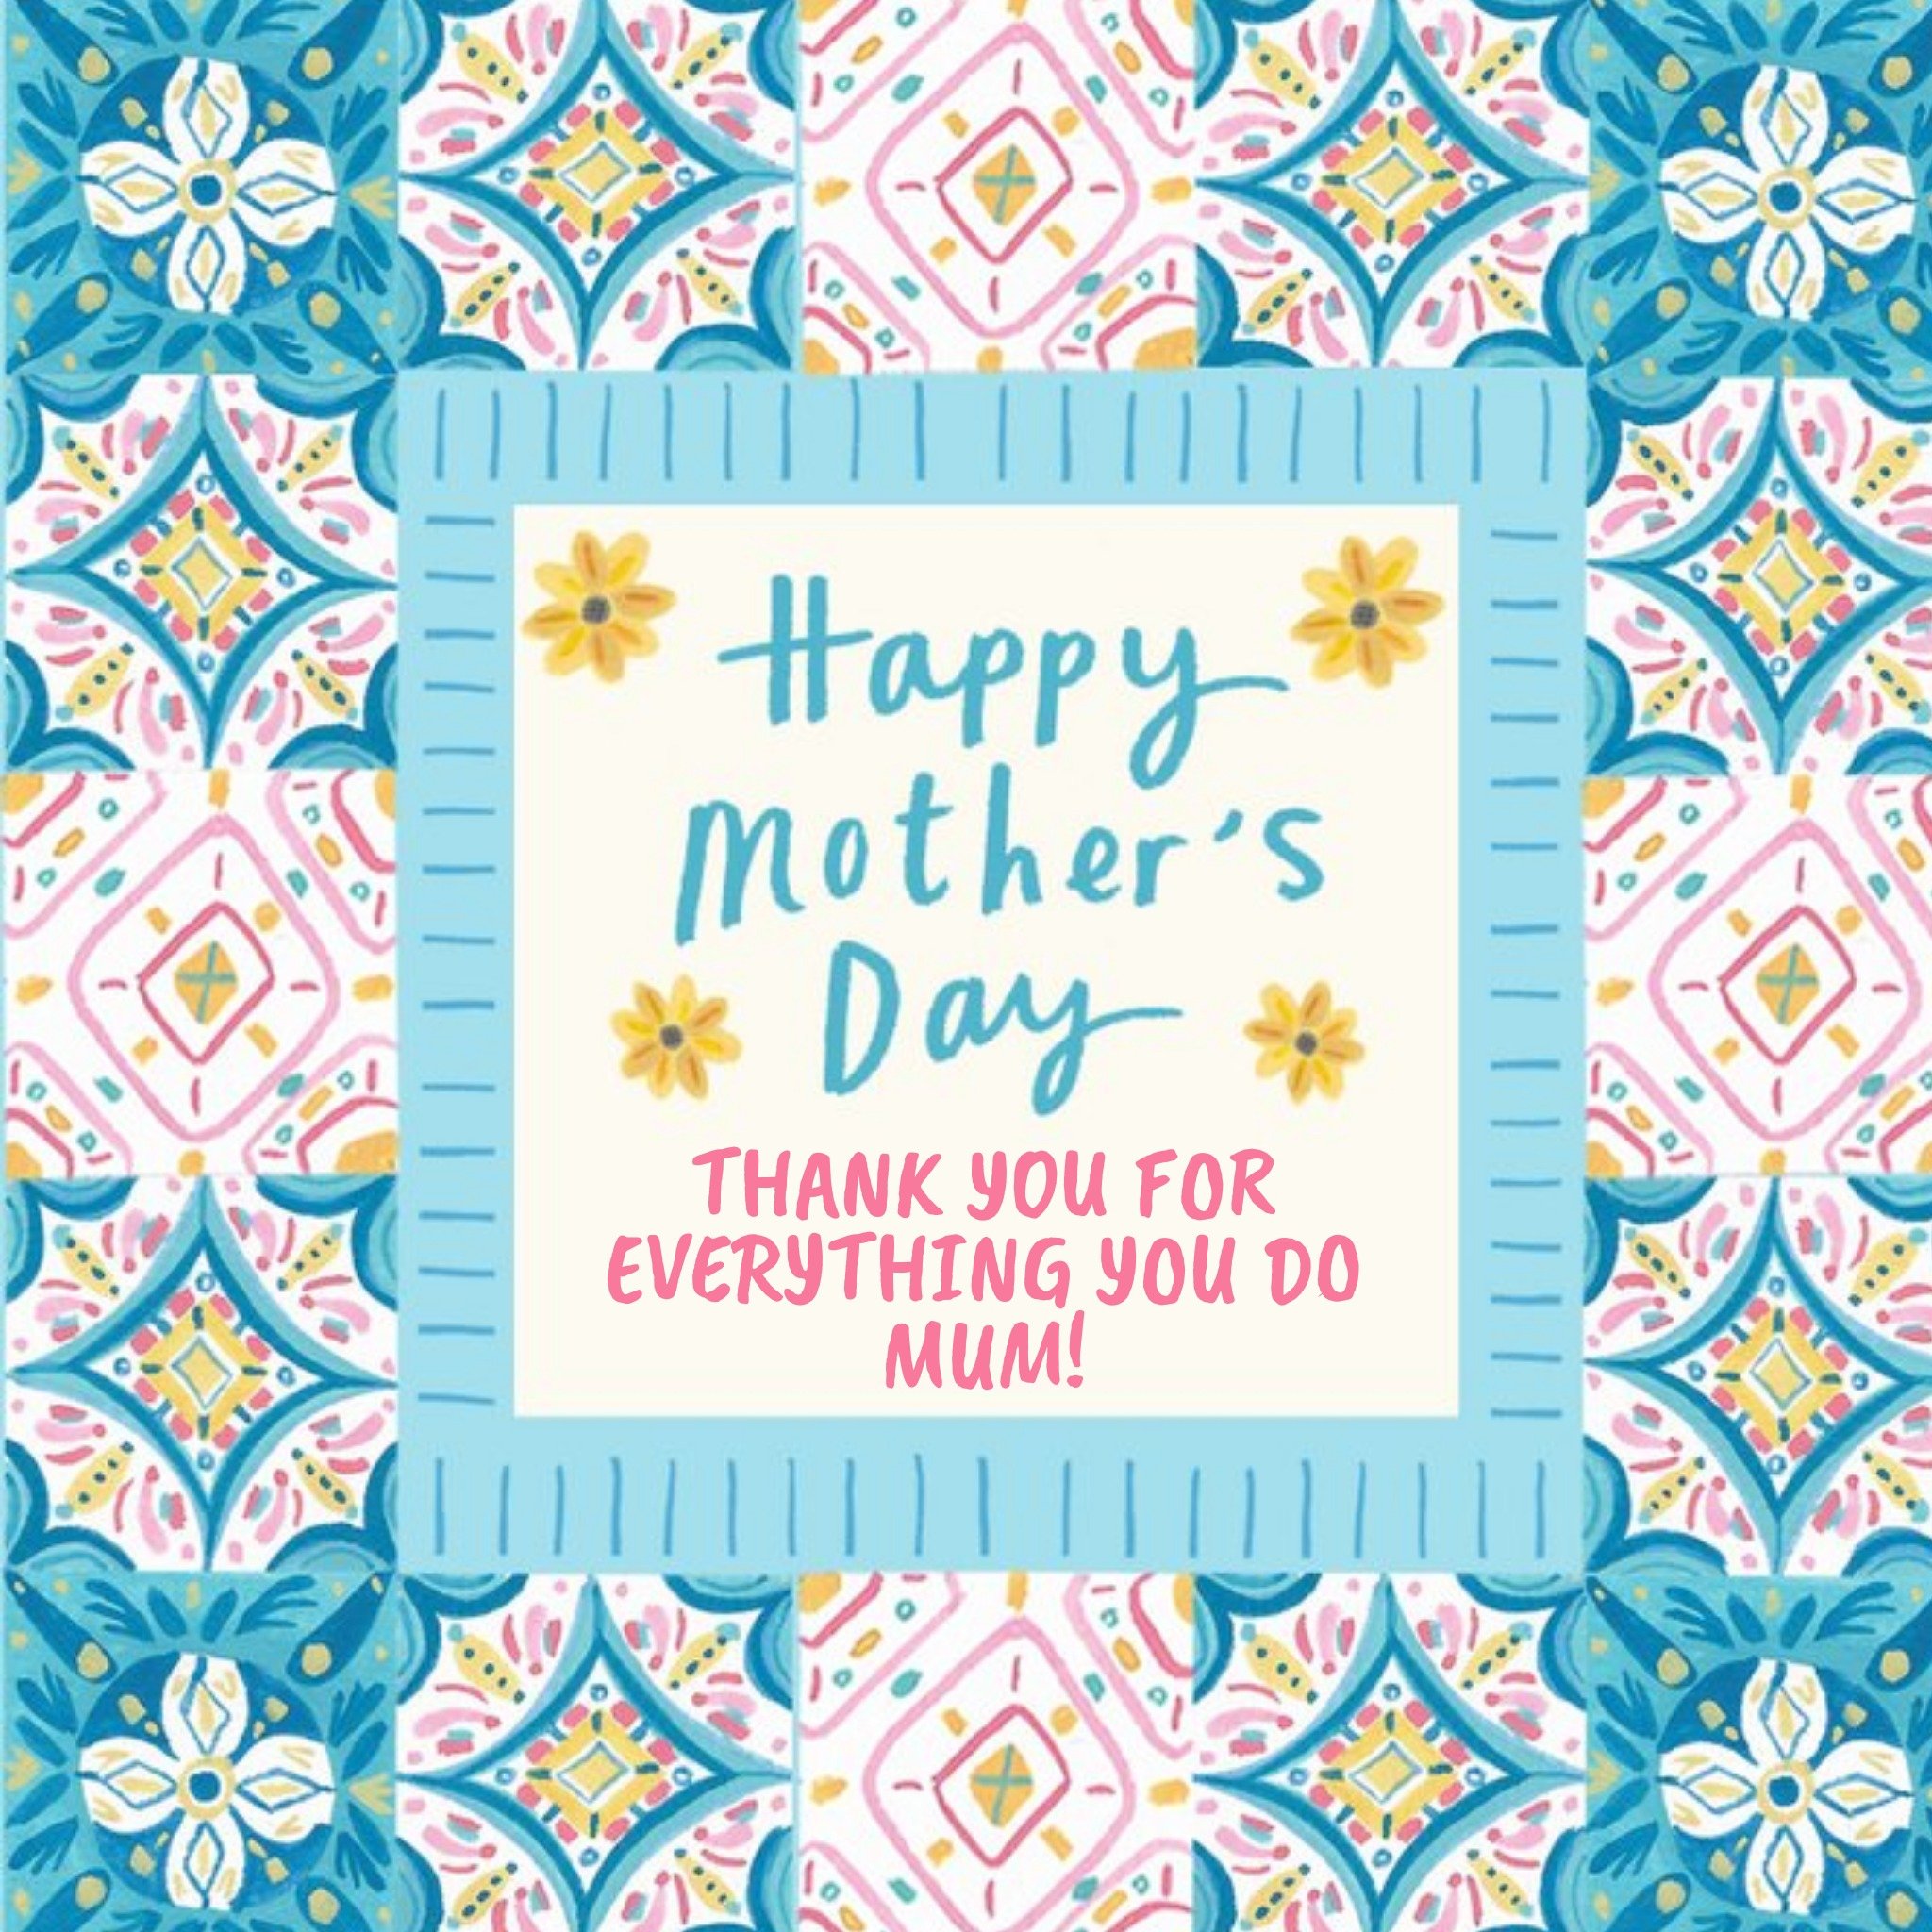 Moonpig Moroccan-Inspired Tiles Personalised Happy Mother's Day Card, Square